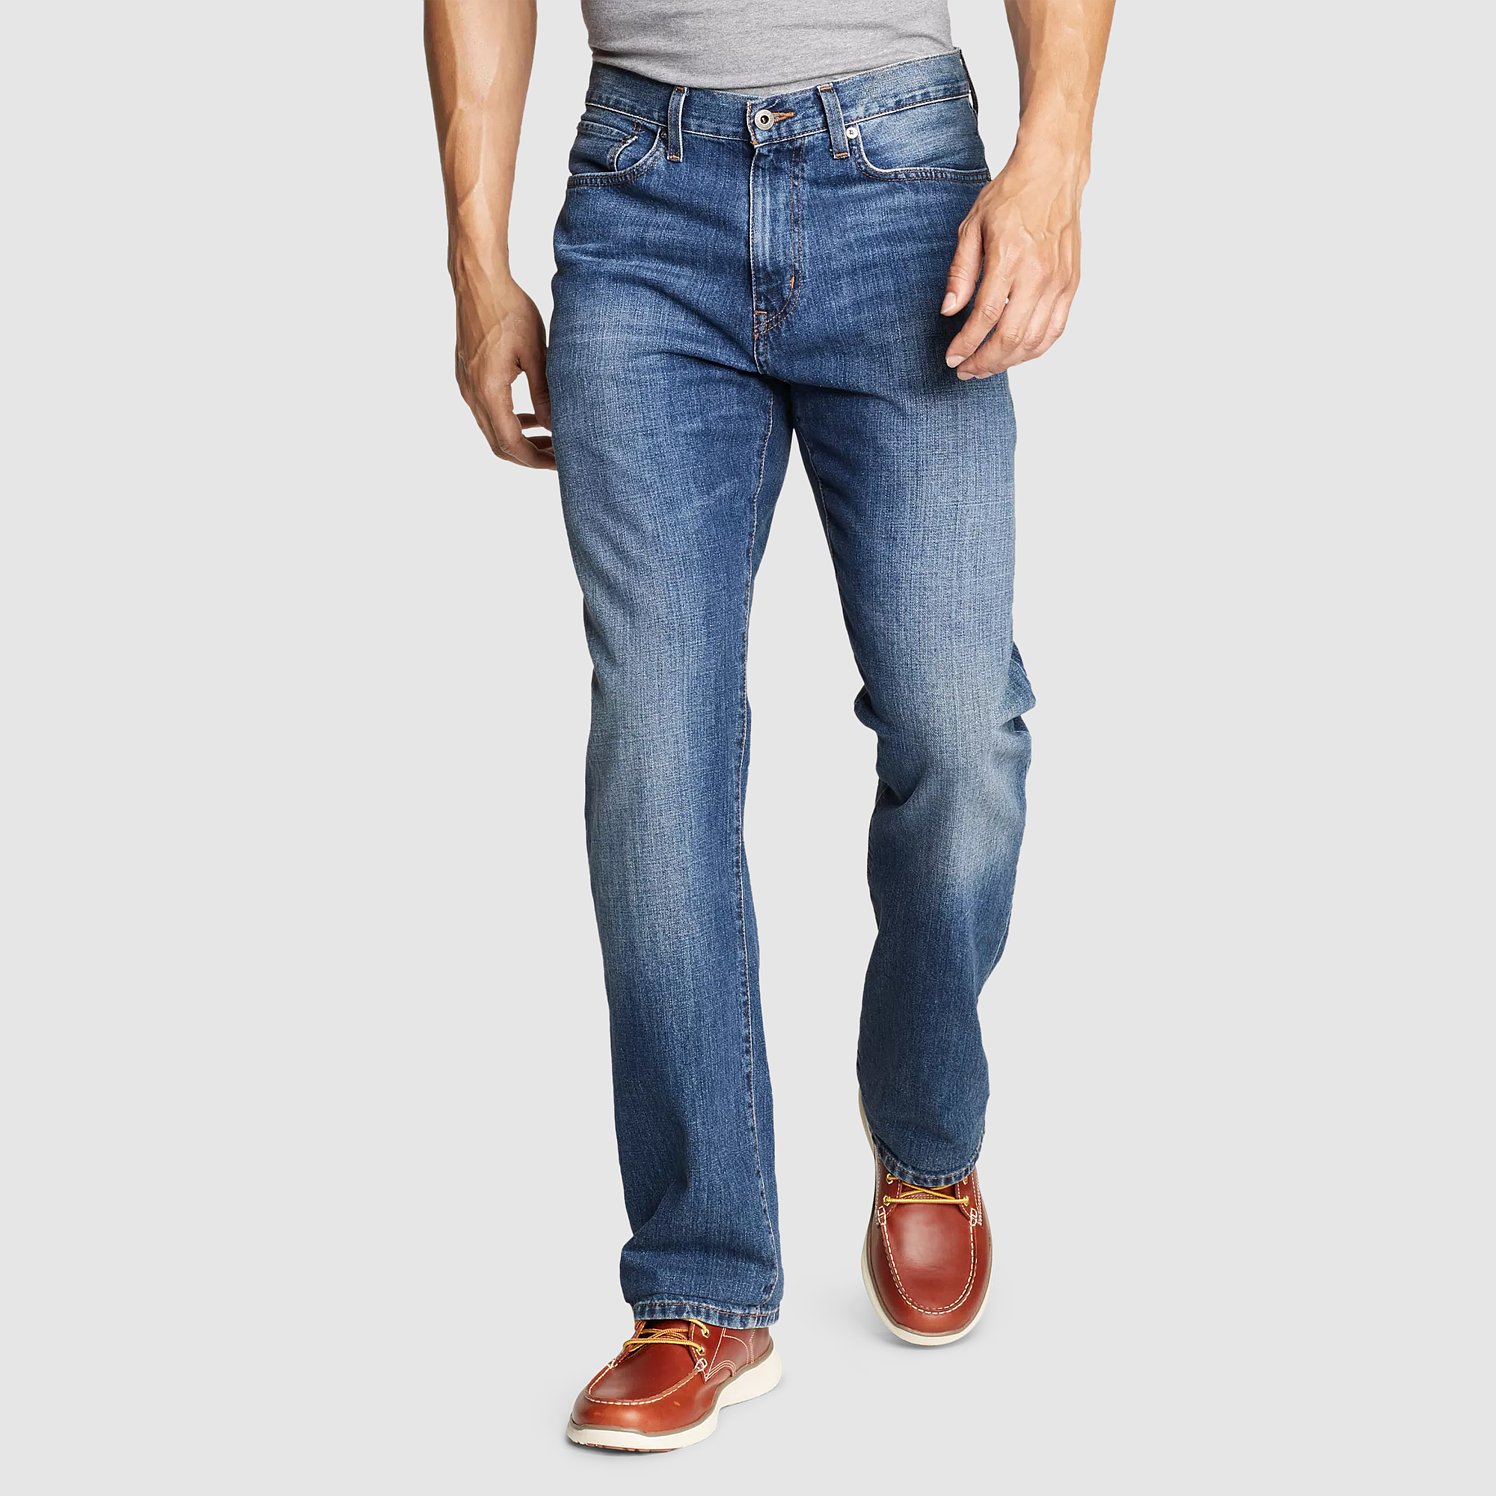 Men's Authentic Jeans - Relaxed Fit